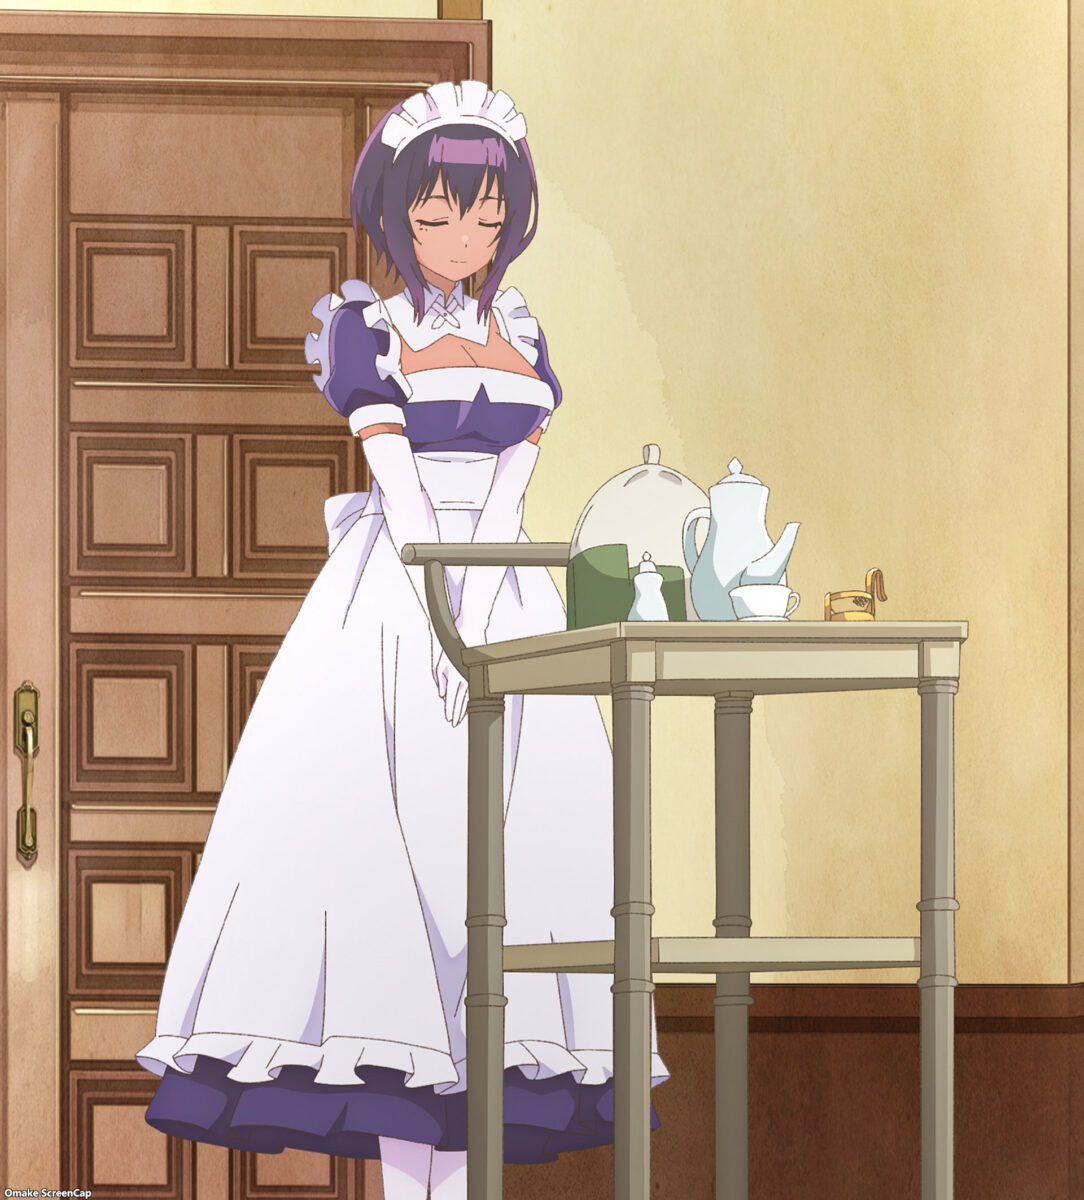 The Maid I Hired Recently Is Mysterious Episode 1 Lilith With Tea Service Tray